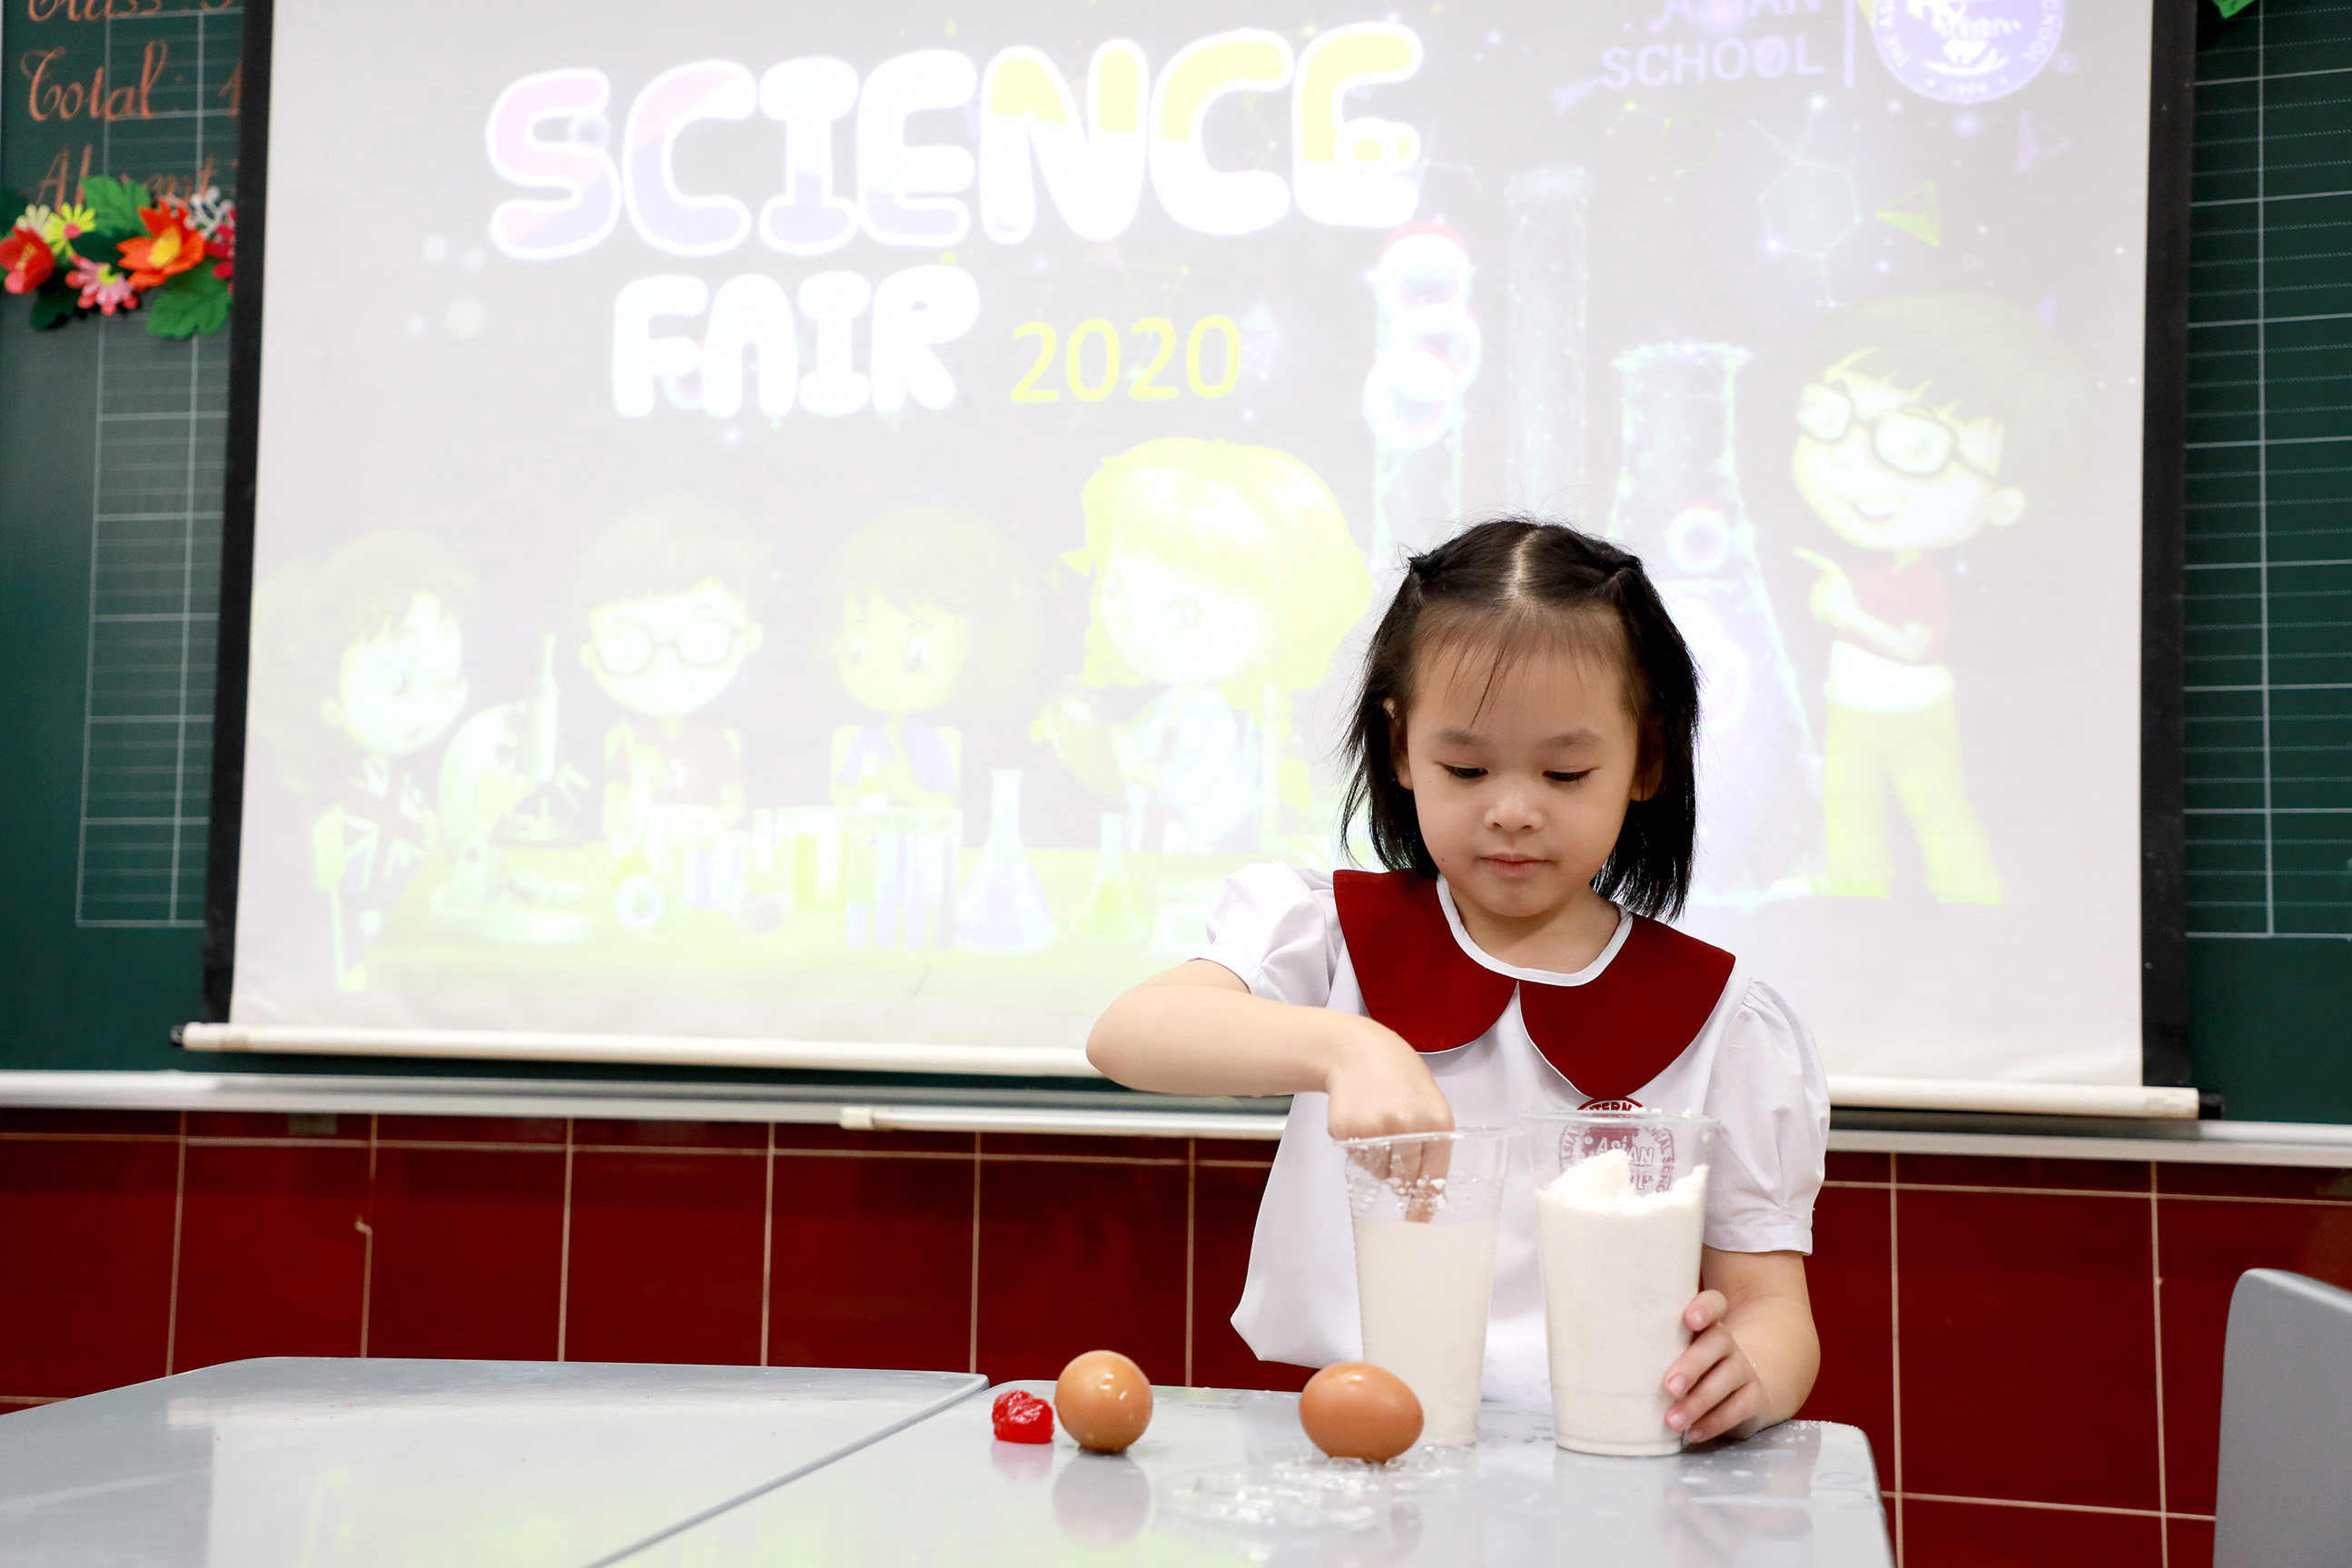 Science day 2020